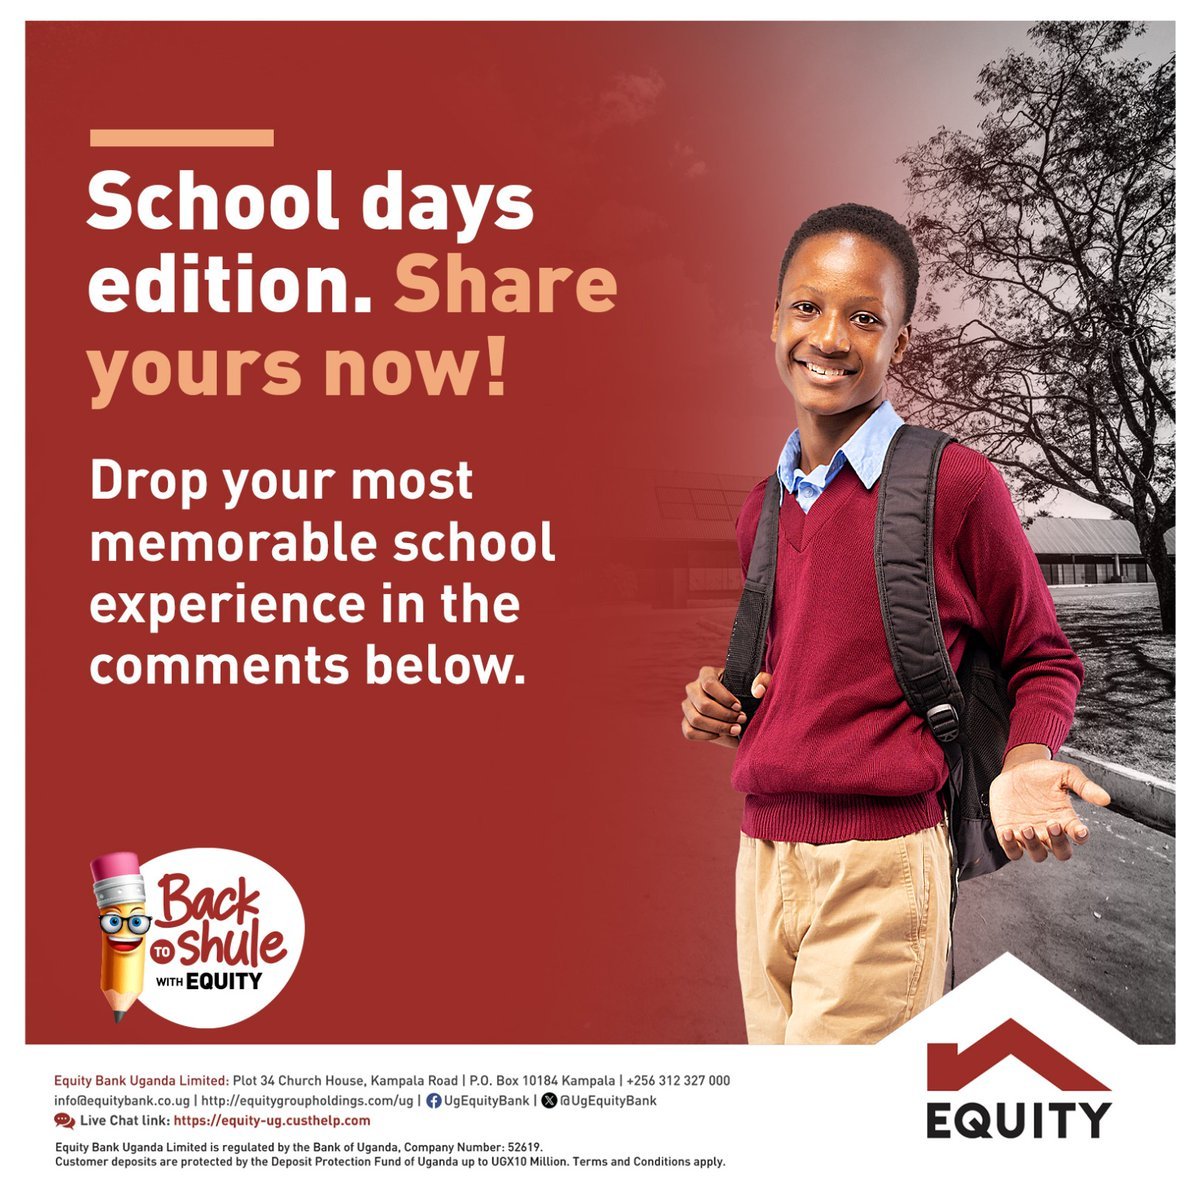 AD: School days edition. Share your memorable school experience in the comments below as you walk down memory lane with @UgEquityBank. #ChimpReportsNews #BackToShuleWithEquity